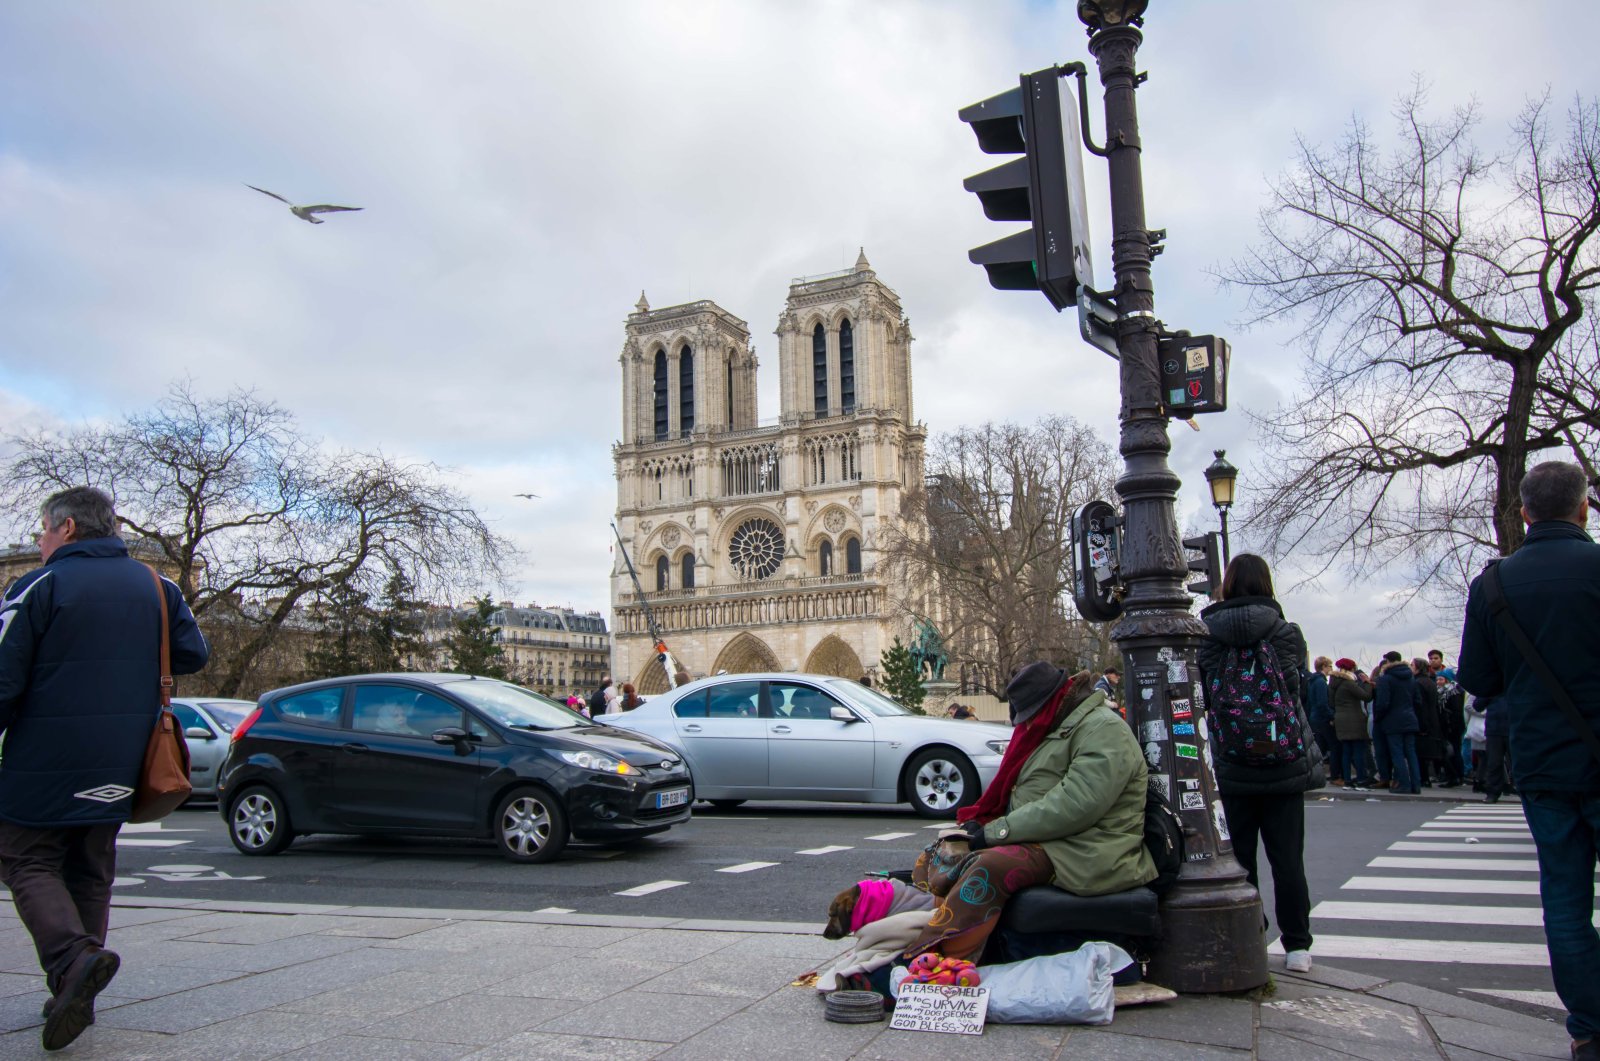 Homeless man with his dog asking for money in front of Notre Dame Cathedral in Paris, France, Dec. 2, 2020. (Shutterstock File Photo)